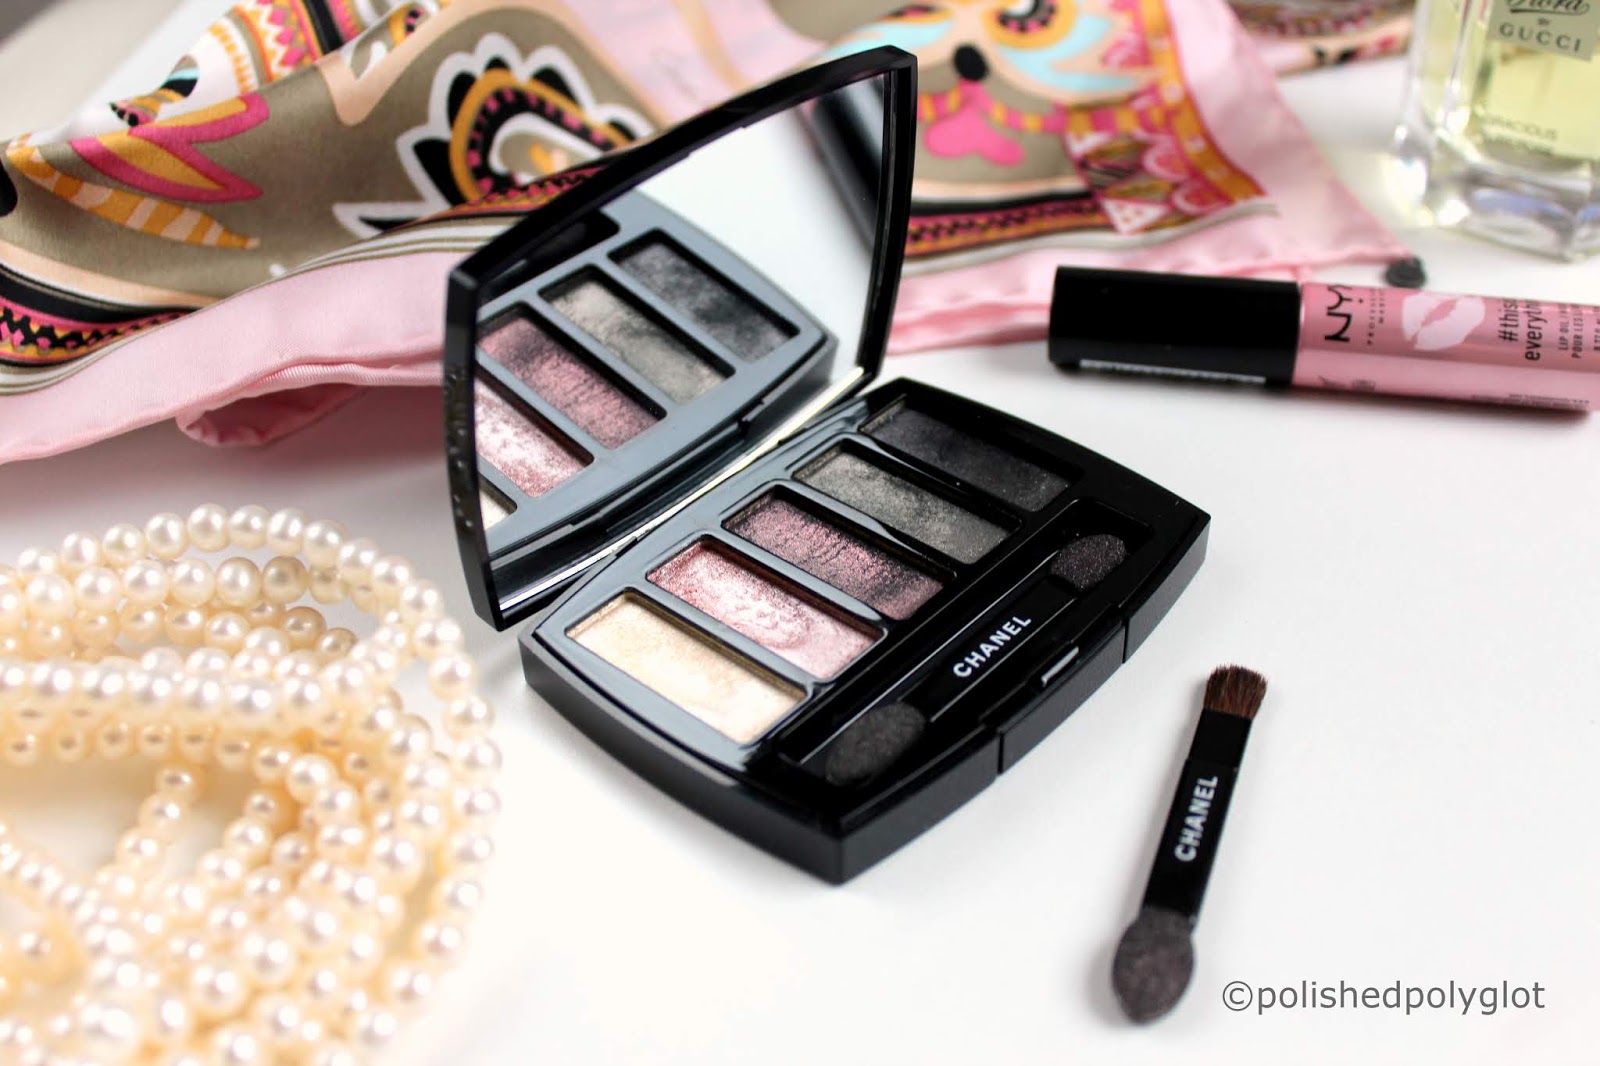 New season makeup collections from Chanel, NARS, Tom Ford and more